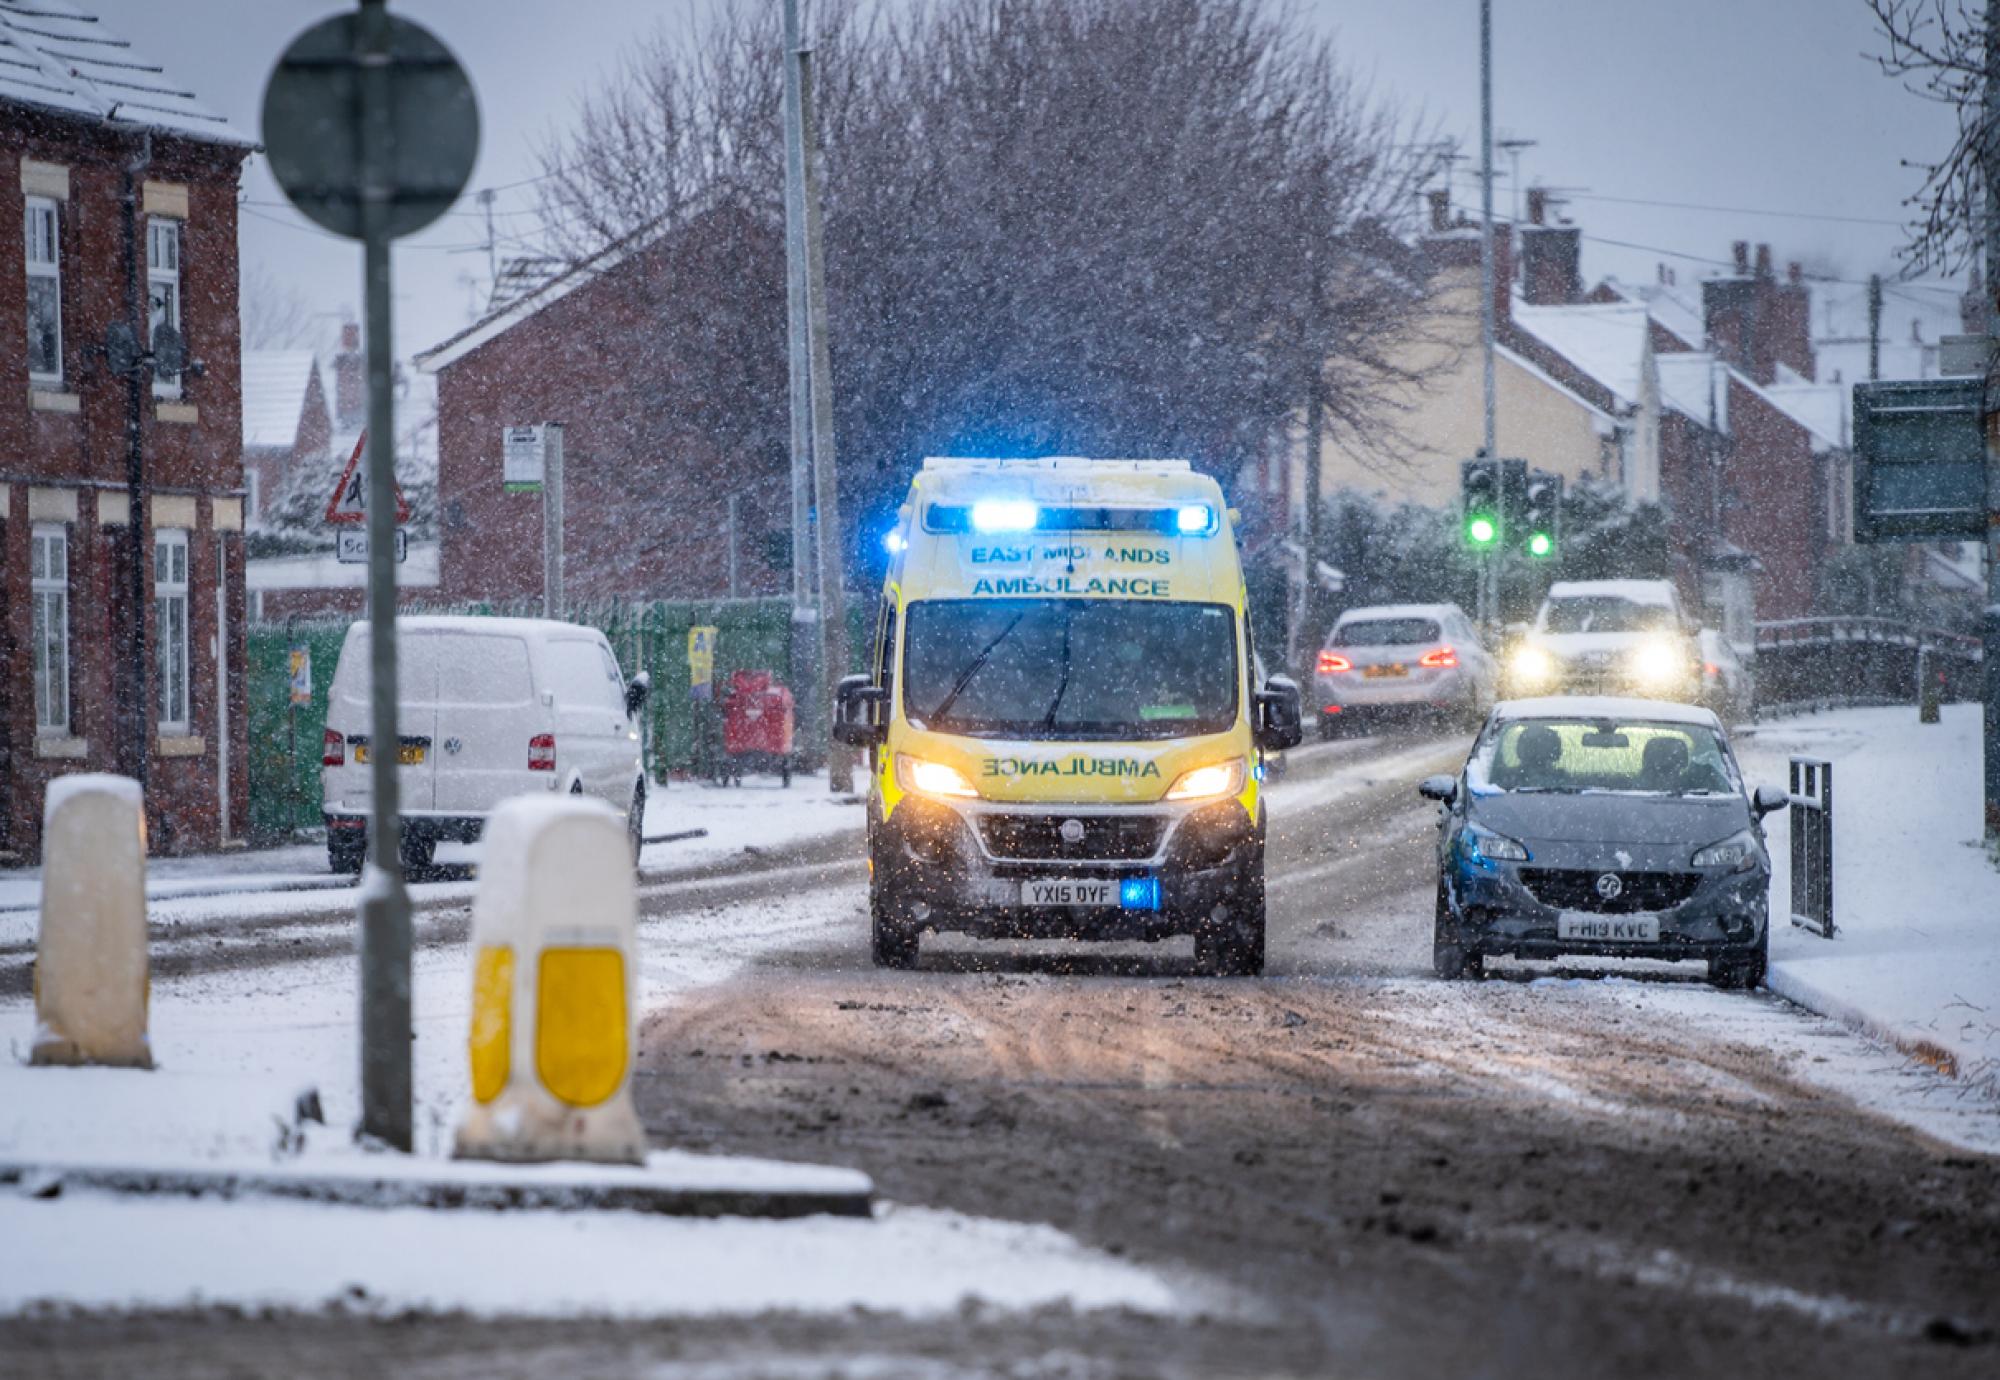 Ambulance driving through snow depicting the NHS winter pressures